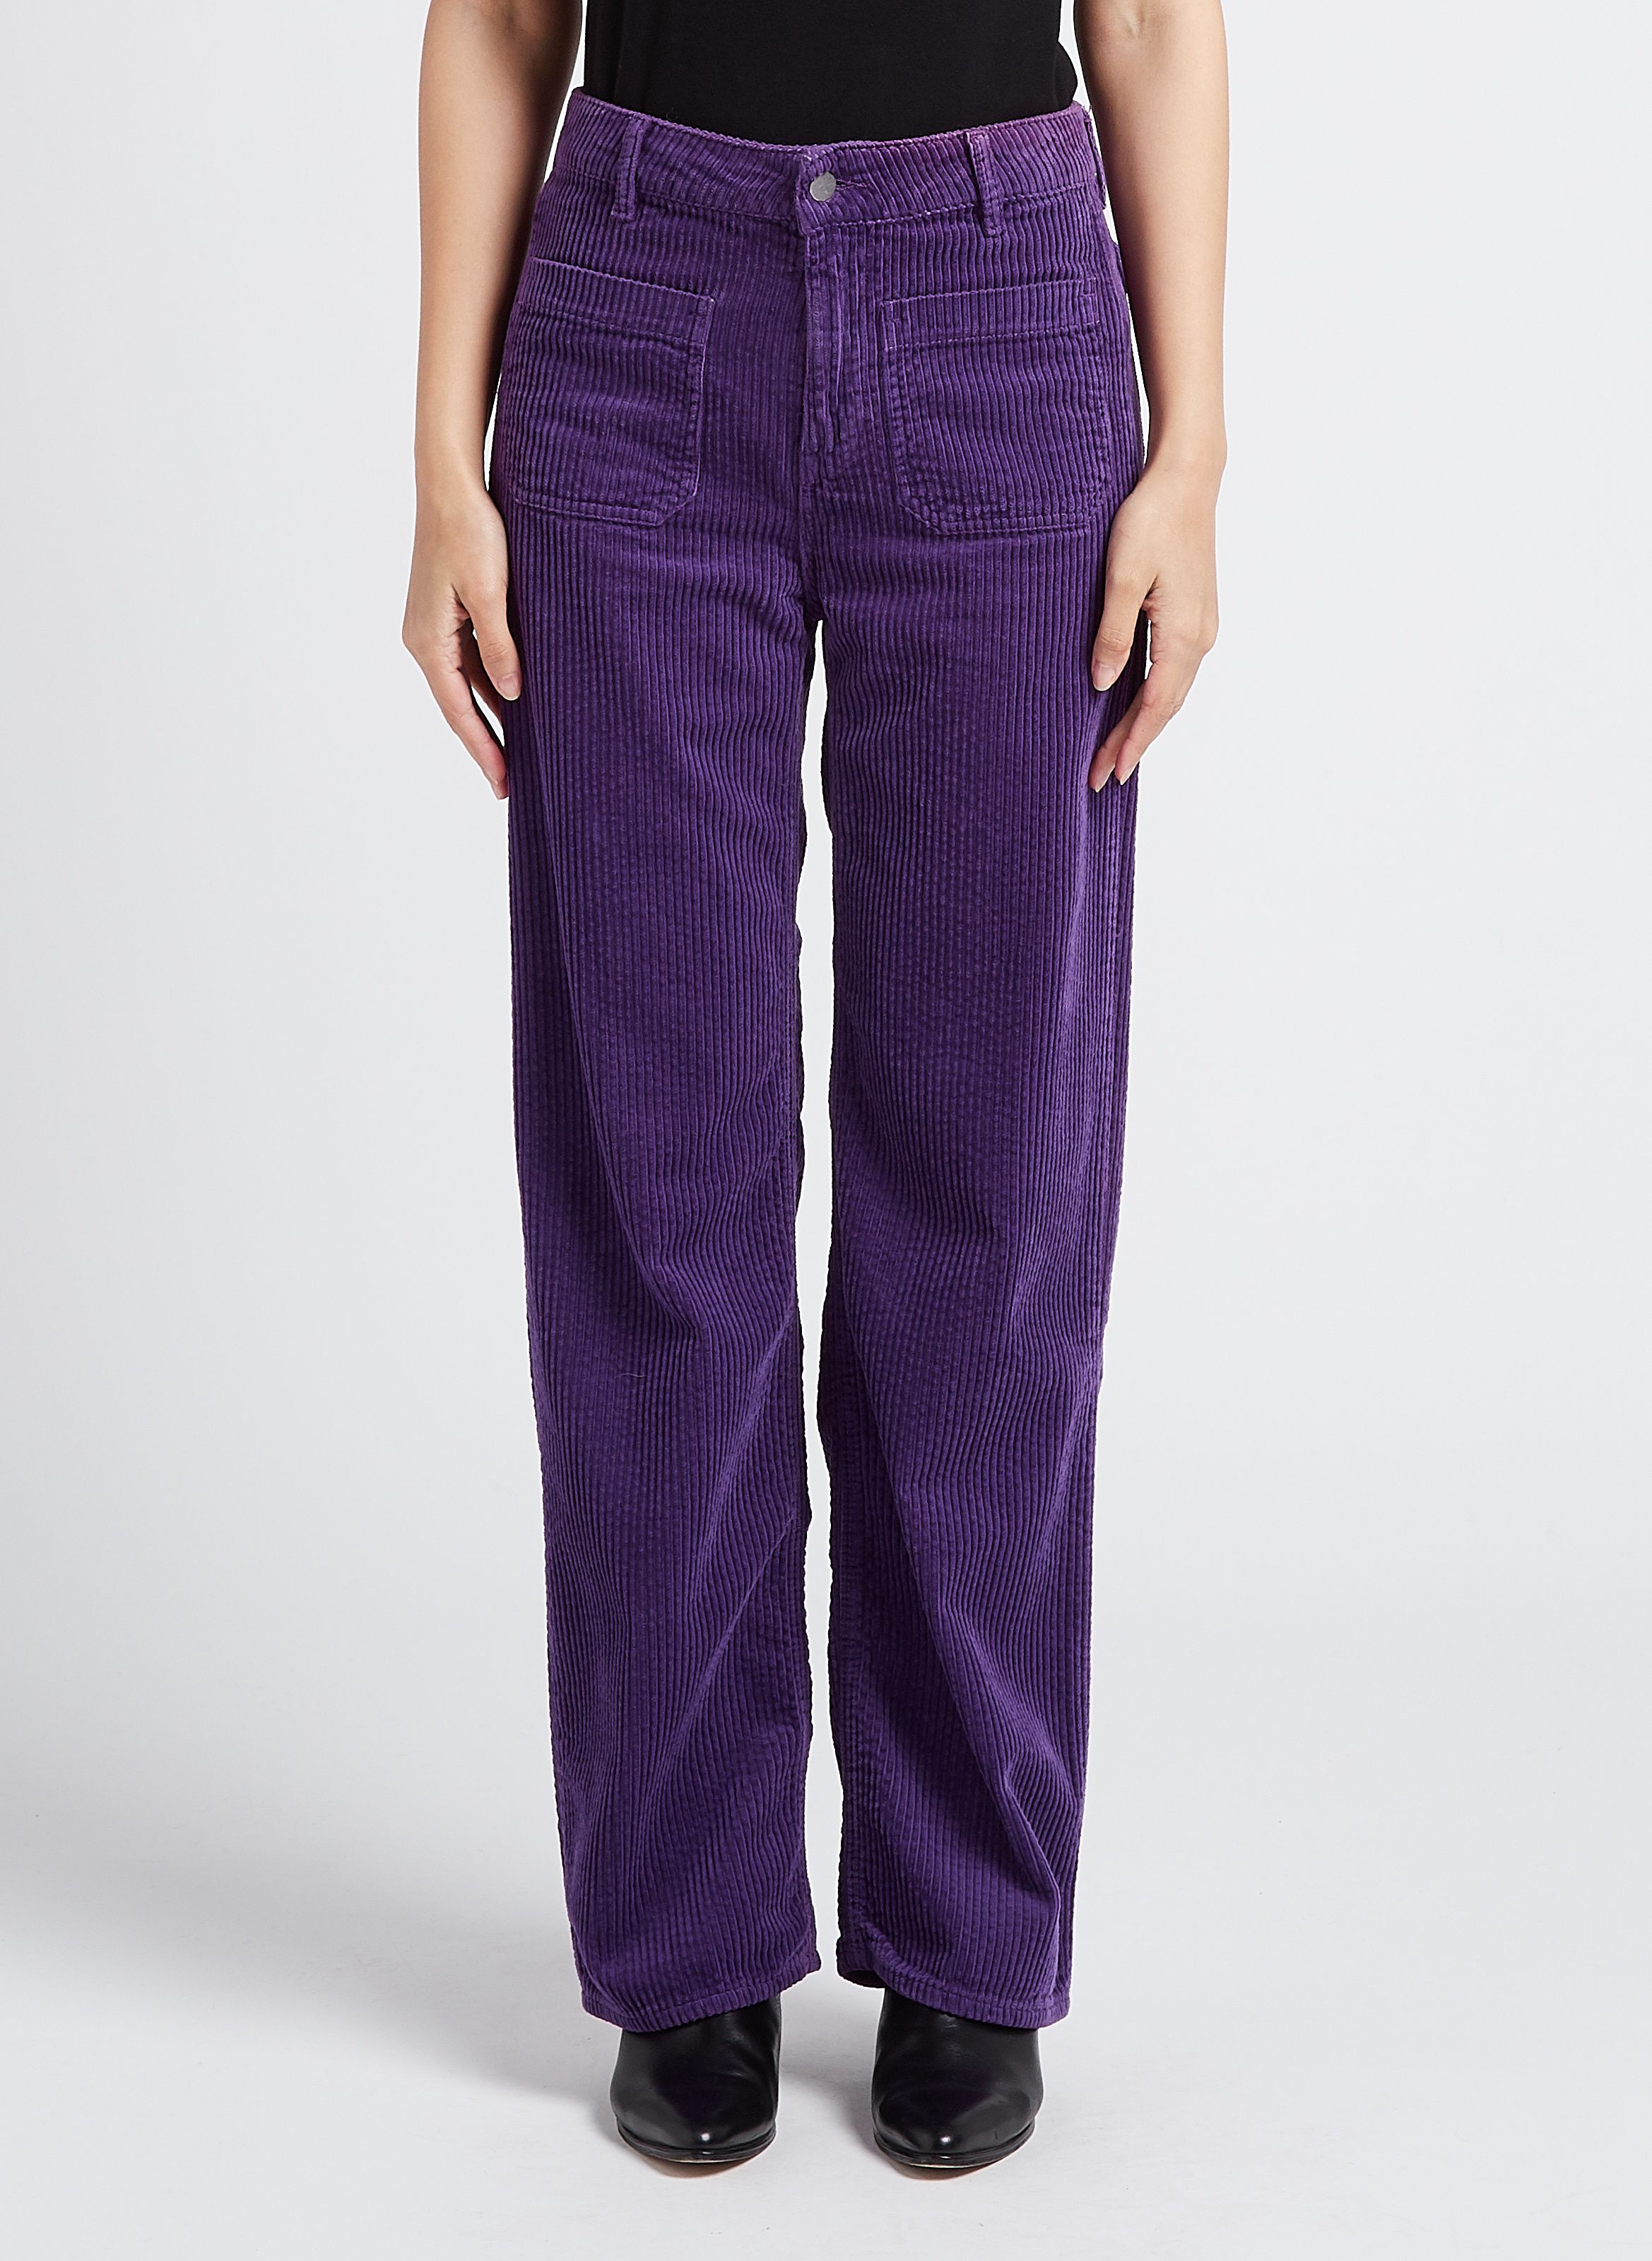 Trousers & Shorts | Cotton Traders Womens Jersey Pull-On Cord Trousers  Amethyst | AKMV Shahabad